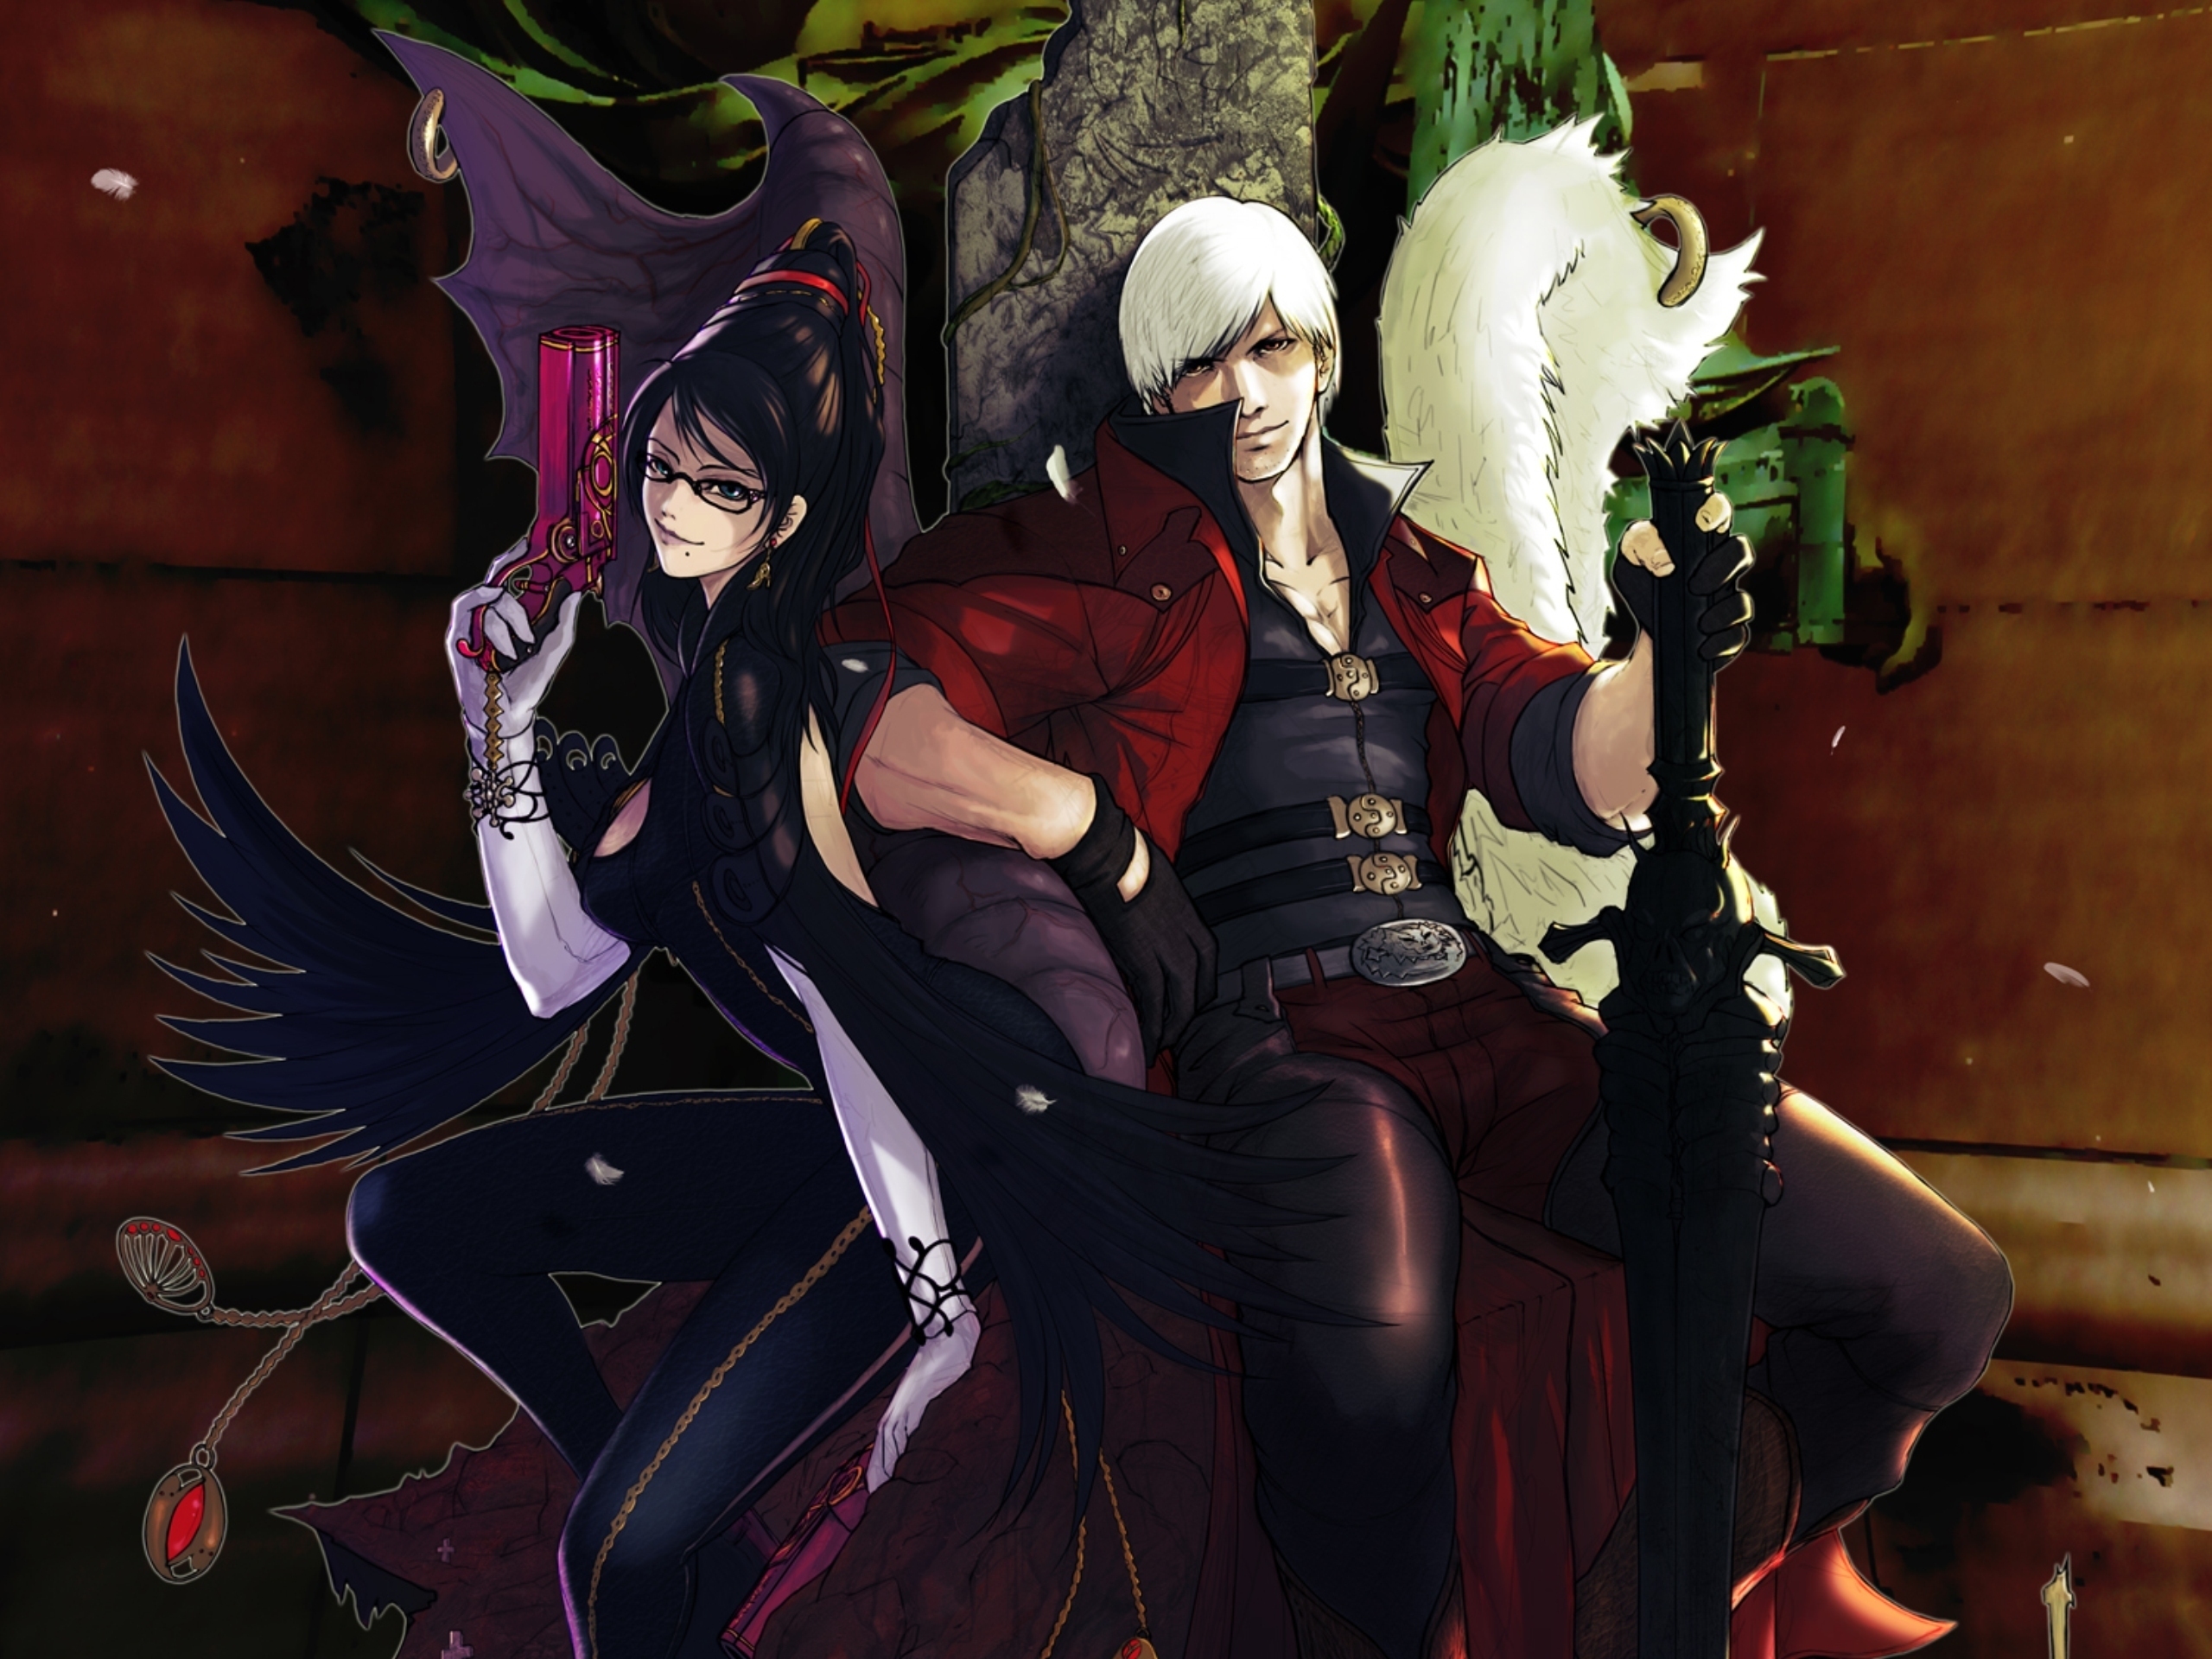 Dynamic crossover art featuring Dante from Devil May Cry and Bayonetta, showcasing their iconic video game characters.